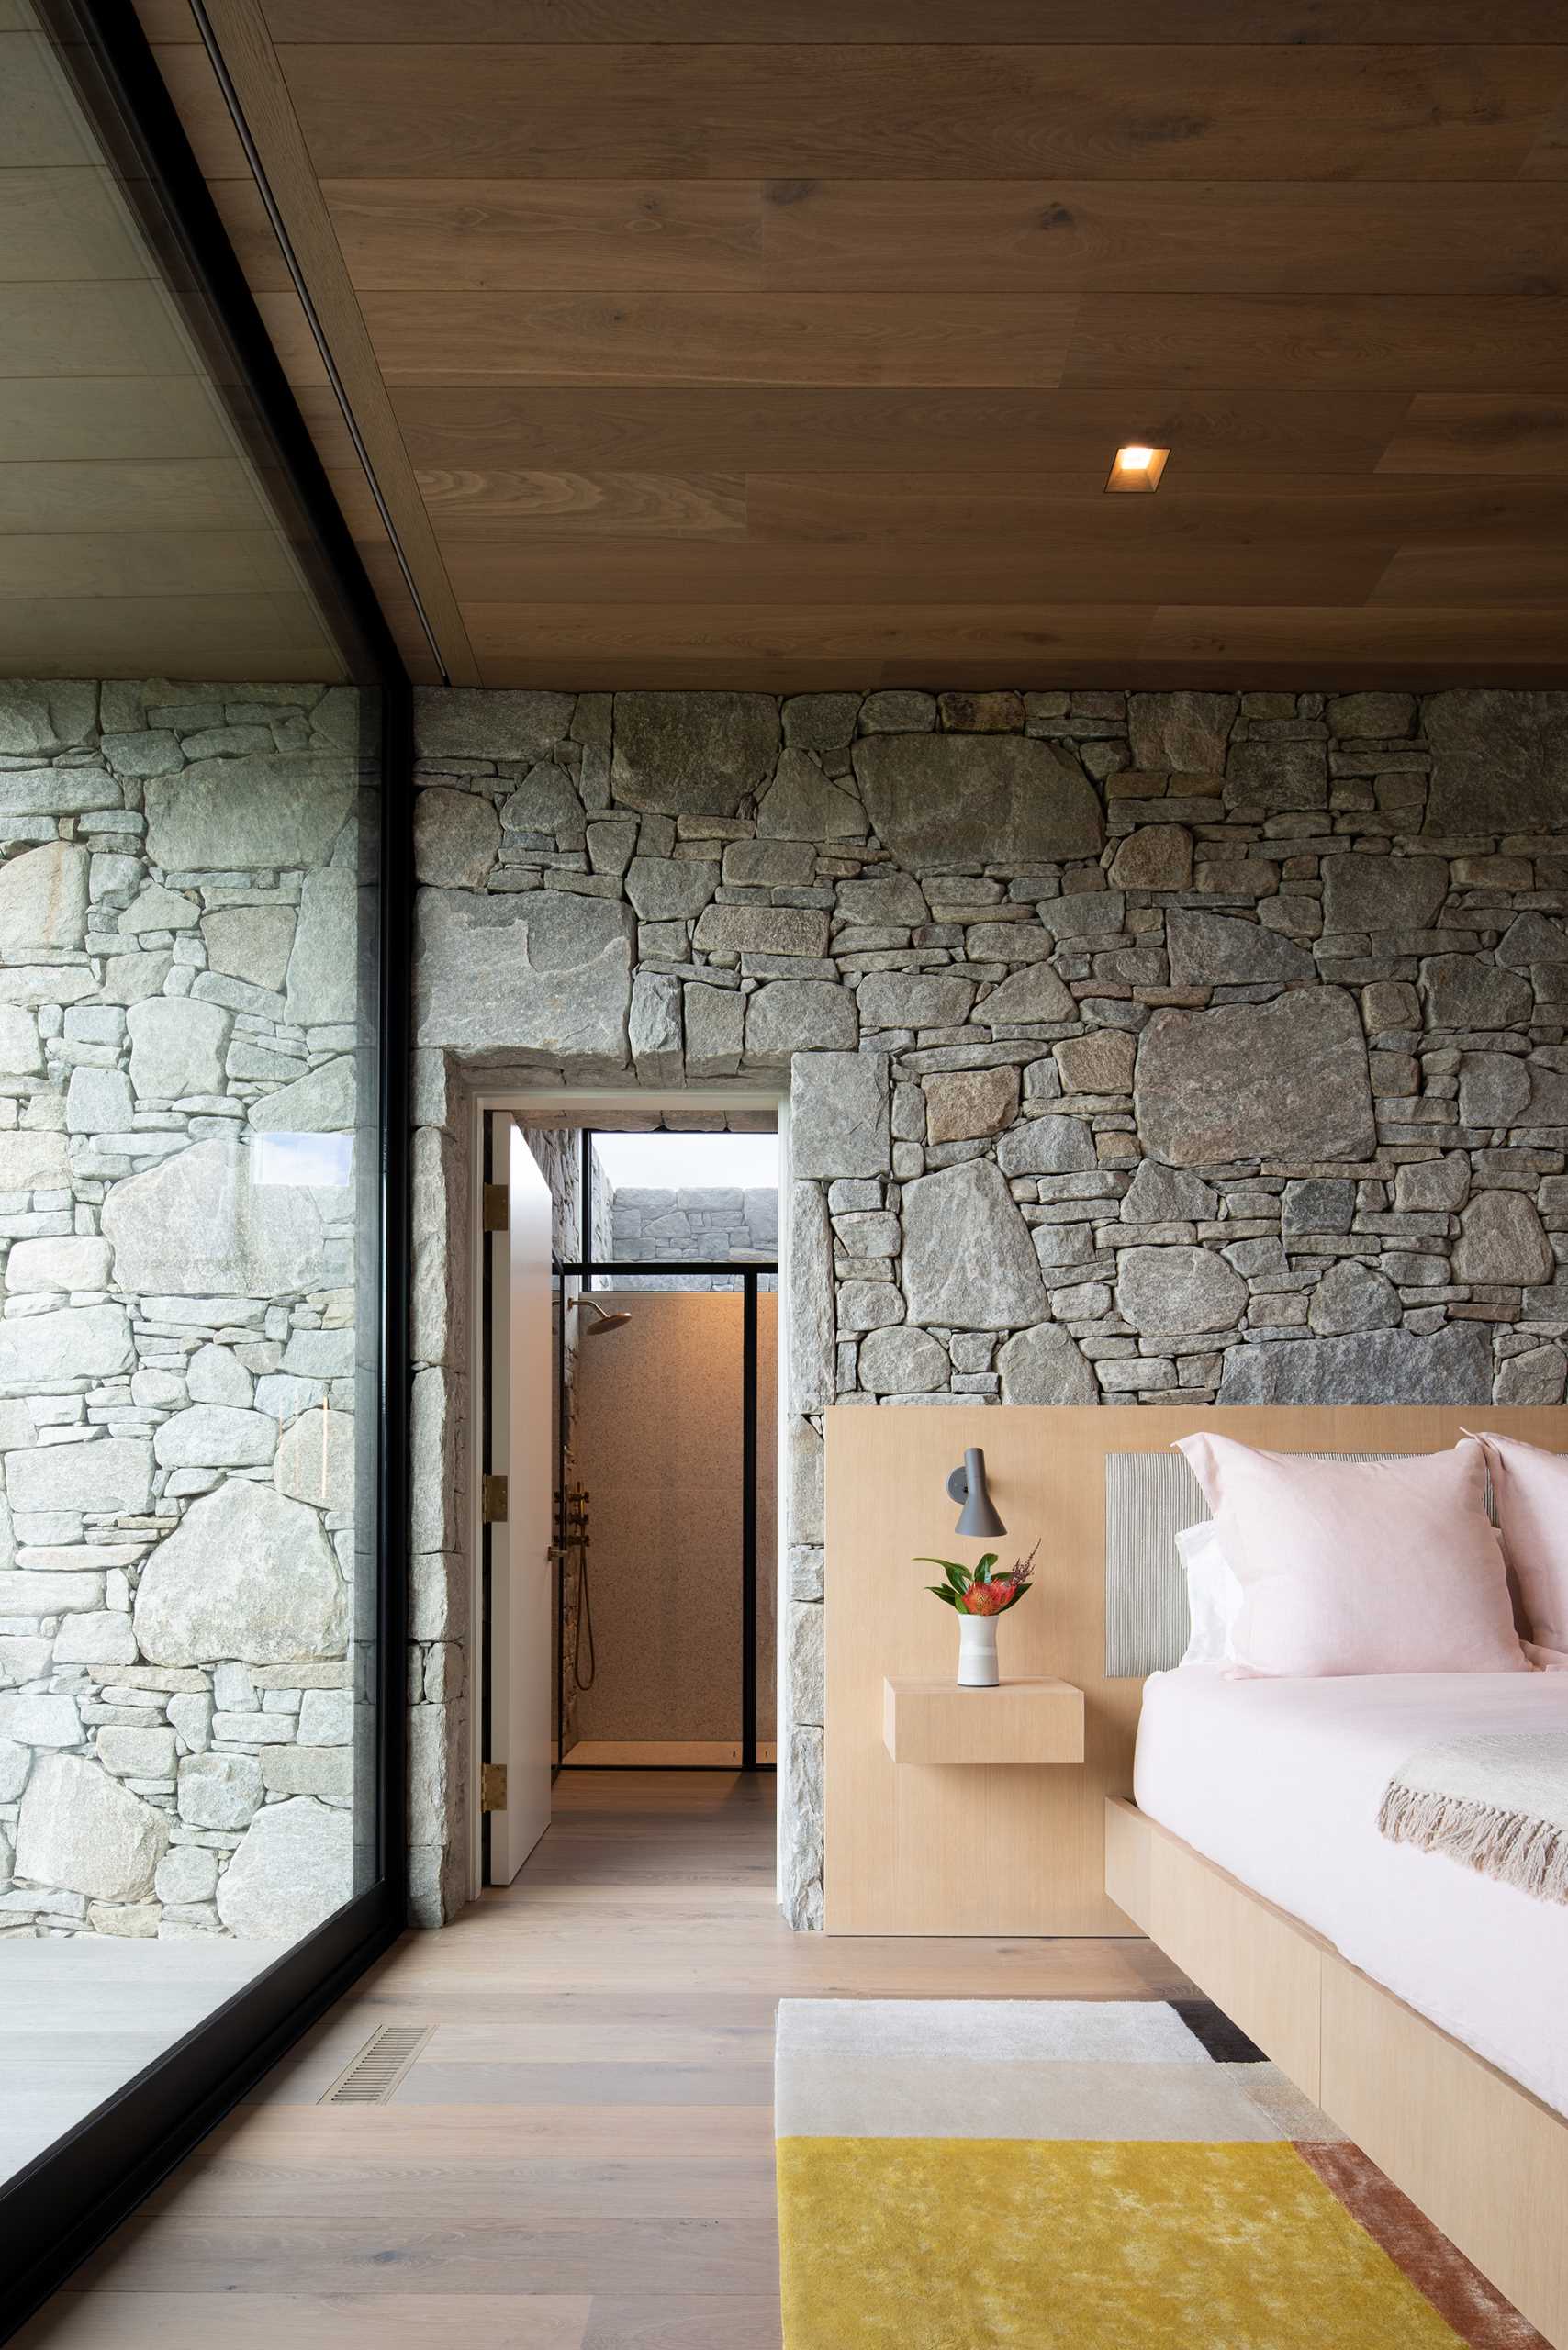 A modern bedroom with stone walls, wood ceiling, and large windows.